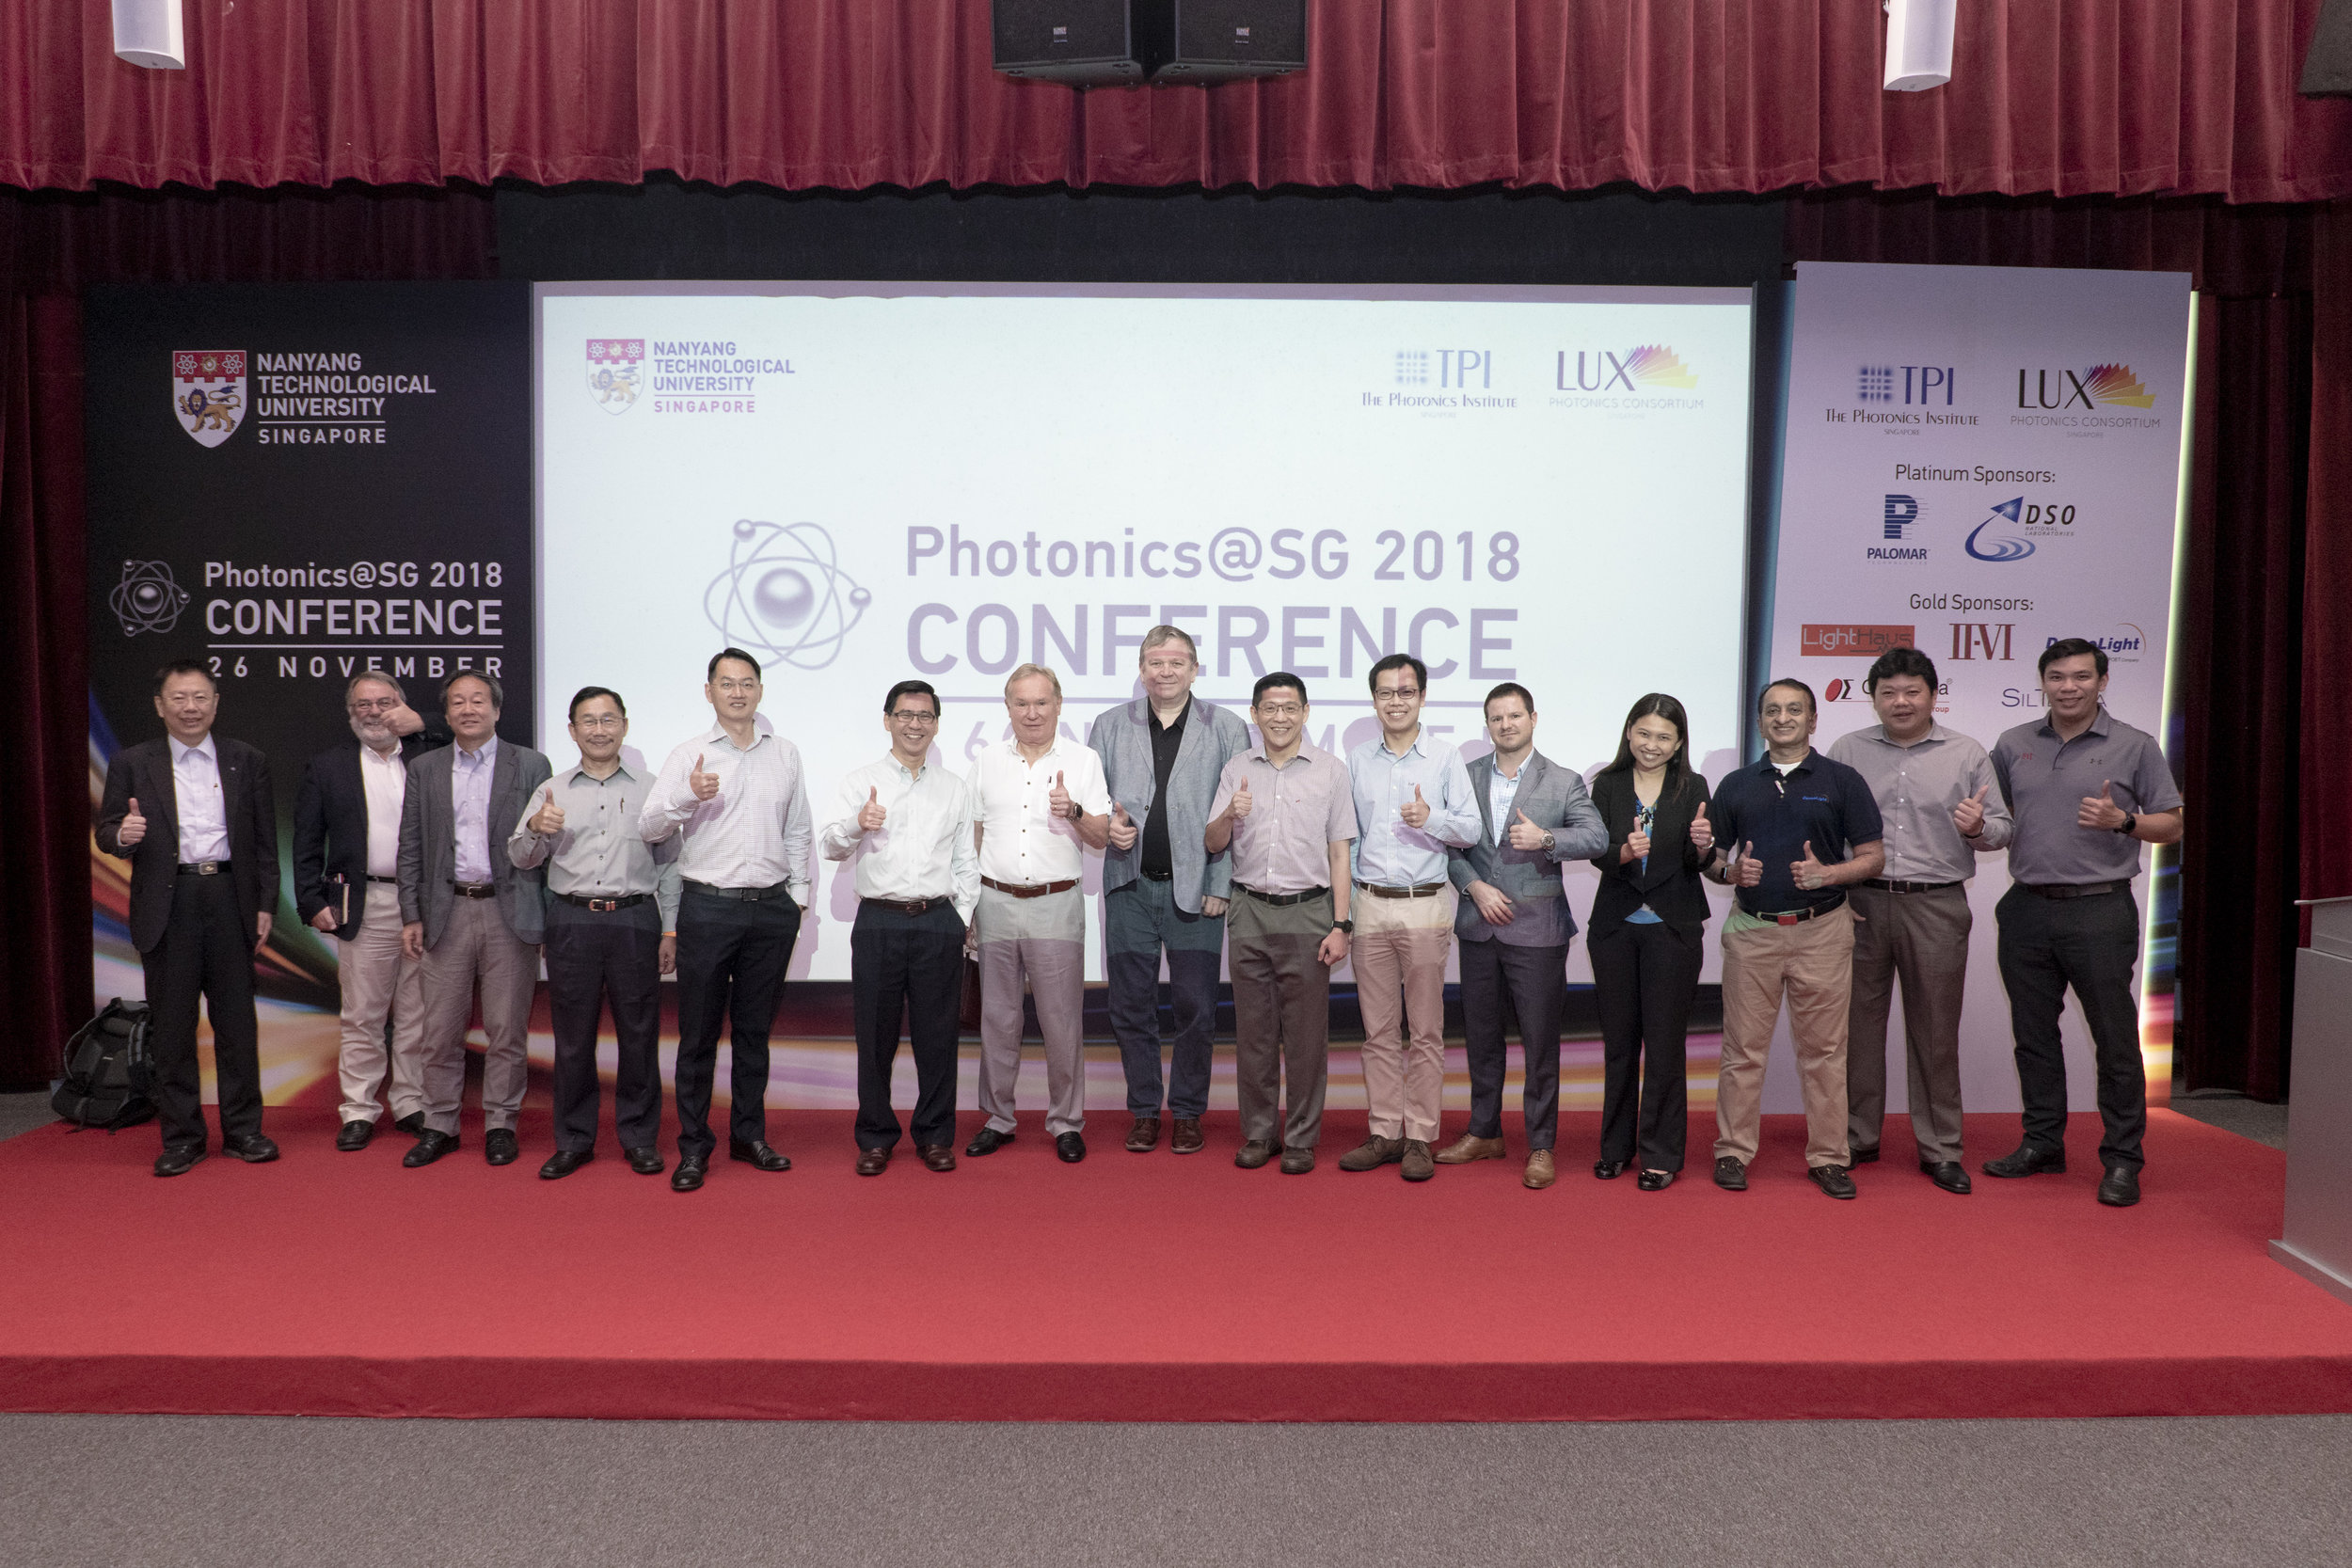 TPI Photonics SG 2018 Conference n Exhibition 0300rc.jpg